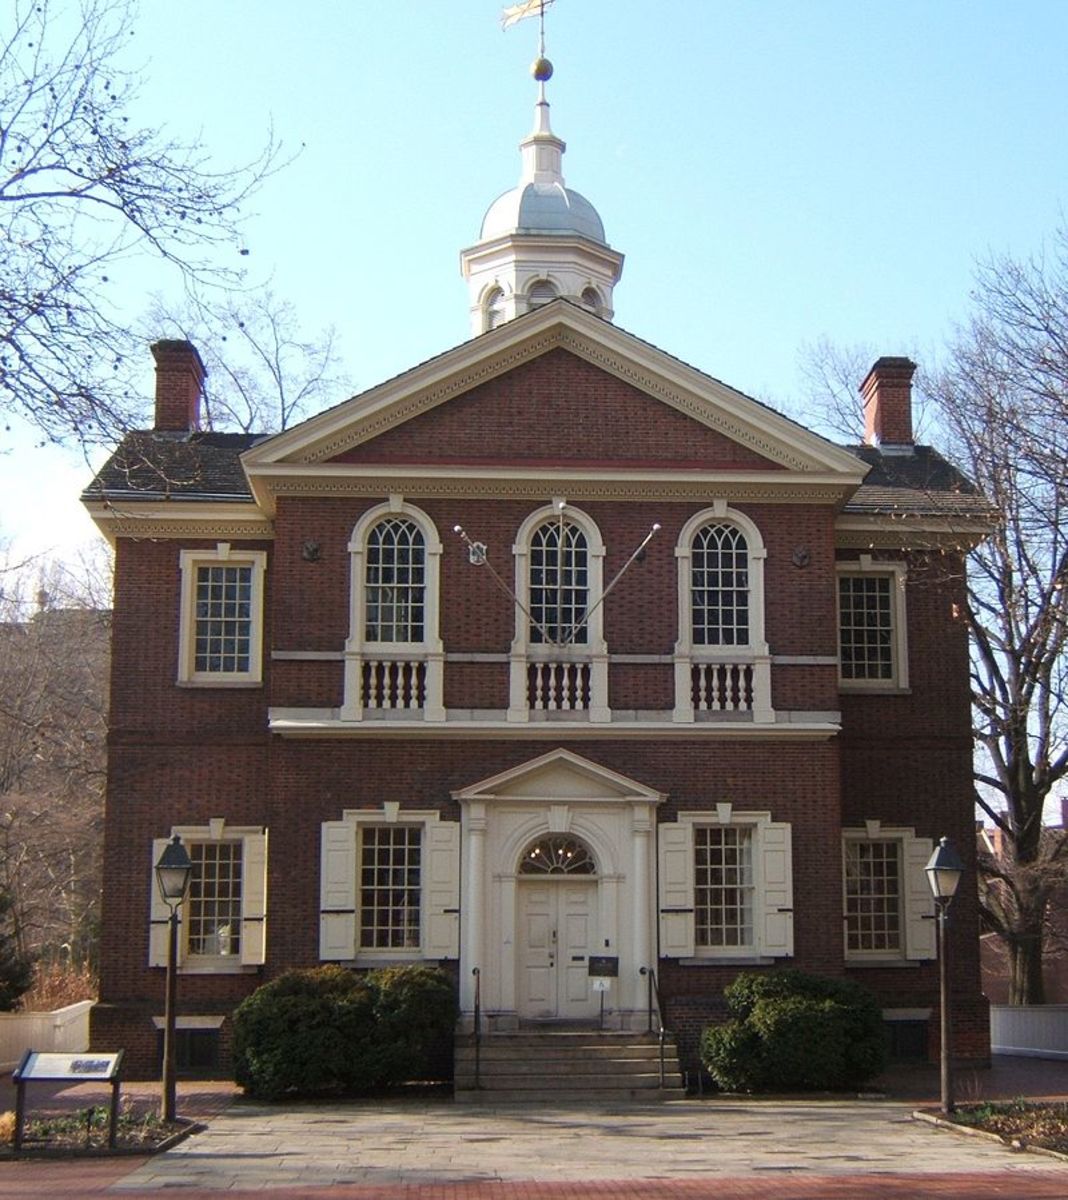 Carpenter’s Hall in Philadelphia, the site of the First Continental Congress in 1774.